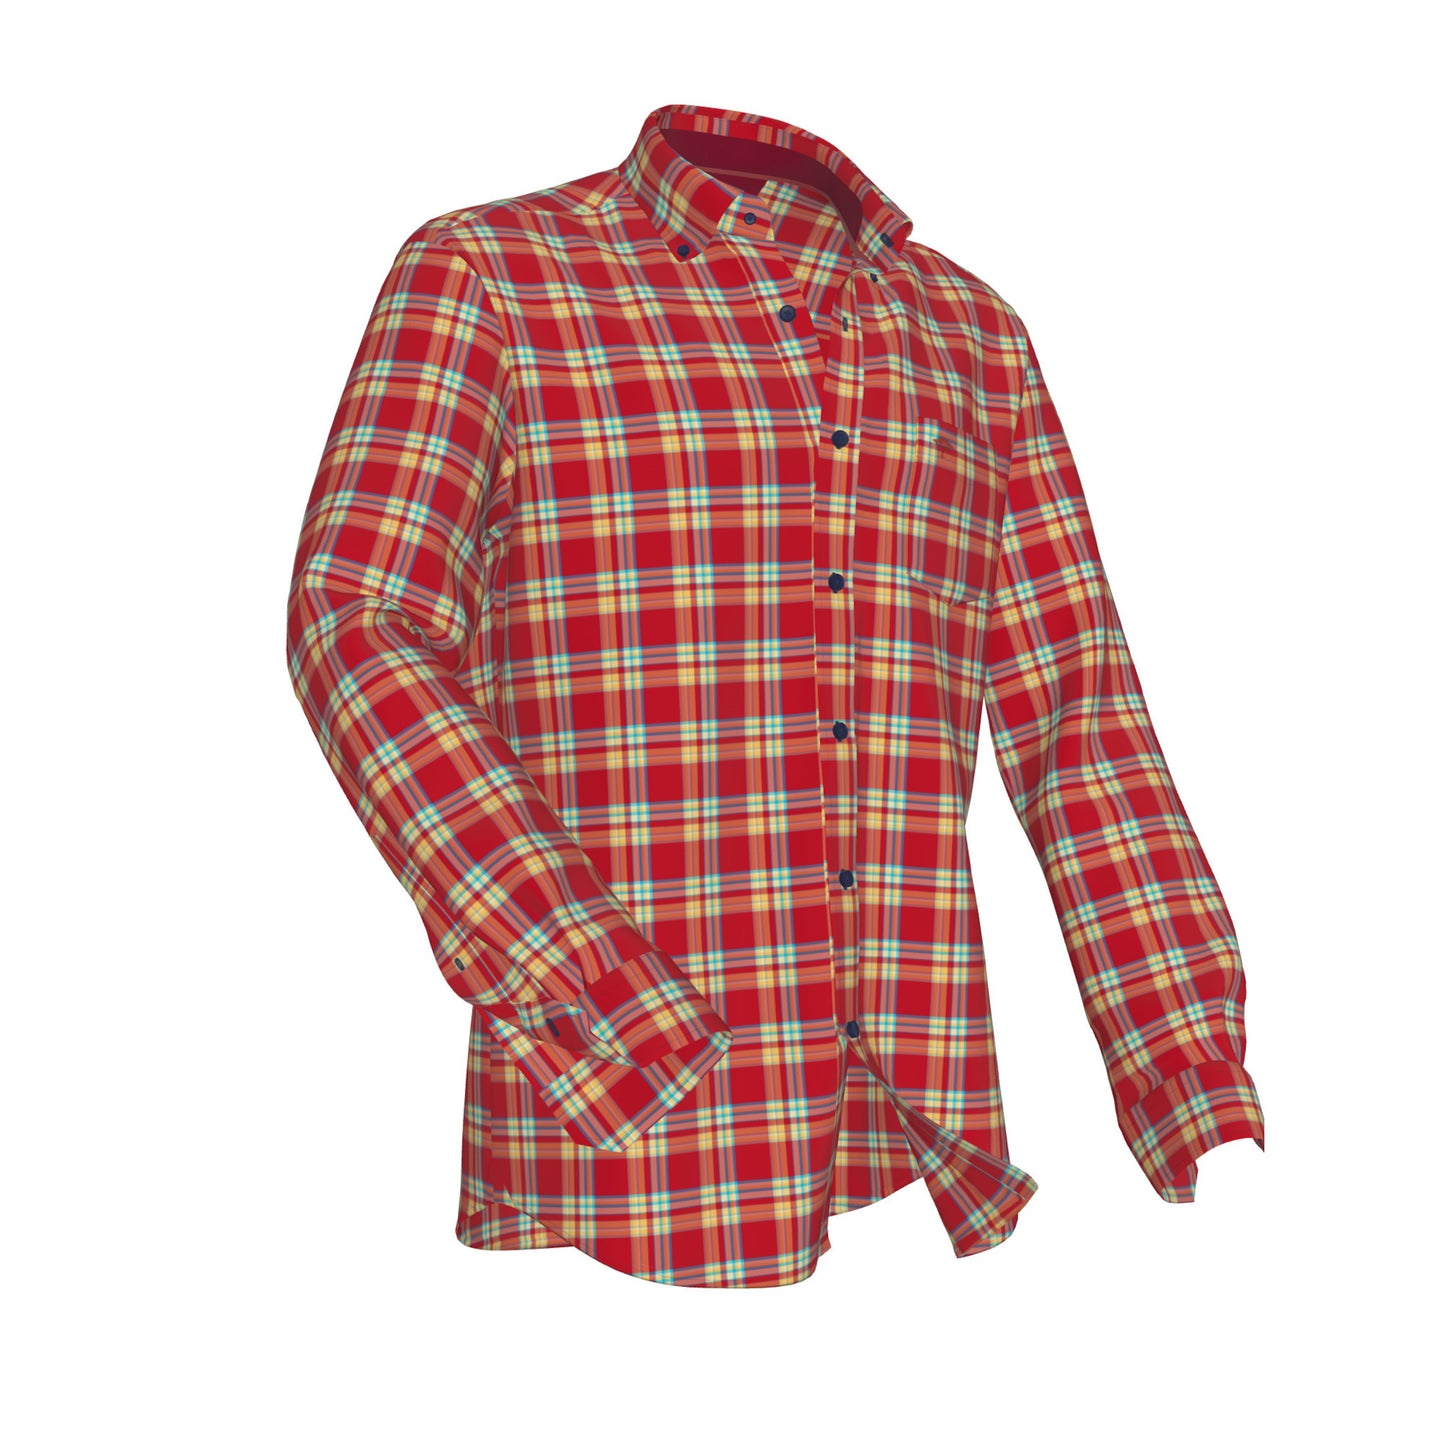 Fynch Hatton 1213 6020 6021 Red Check Flannel Check Casual Shirt